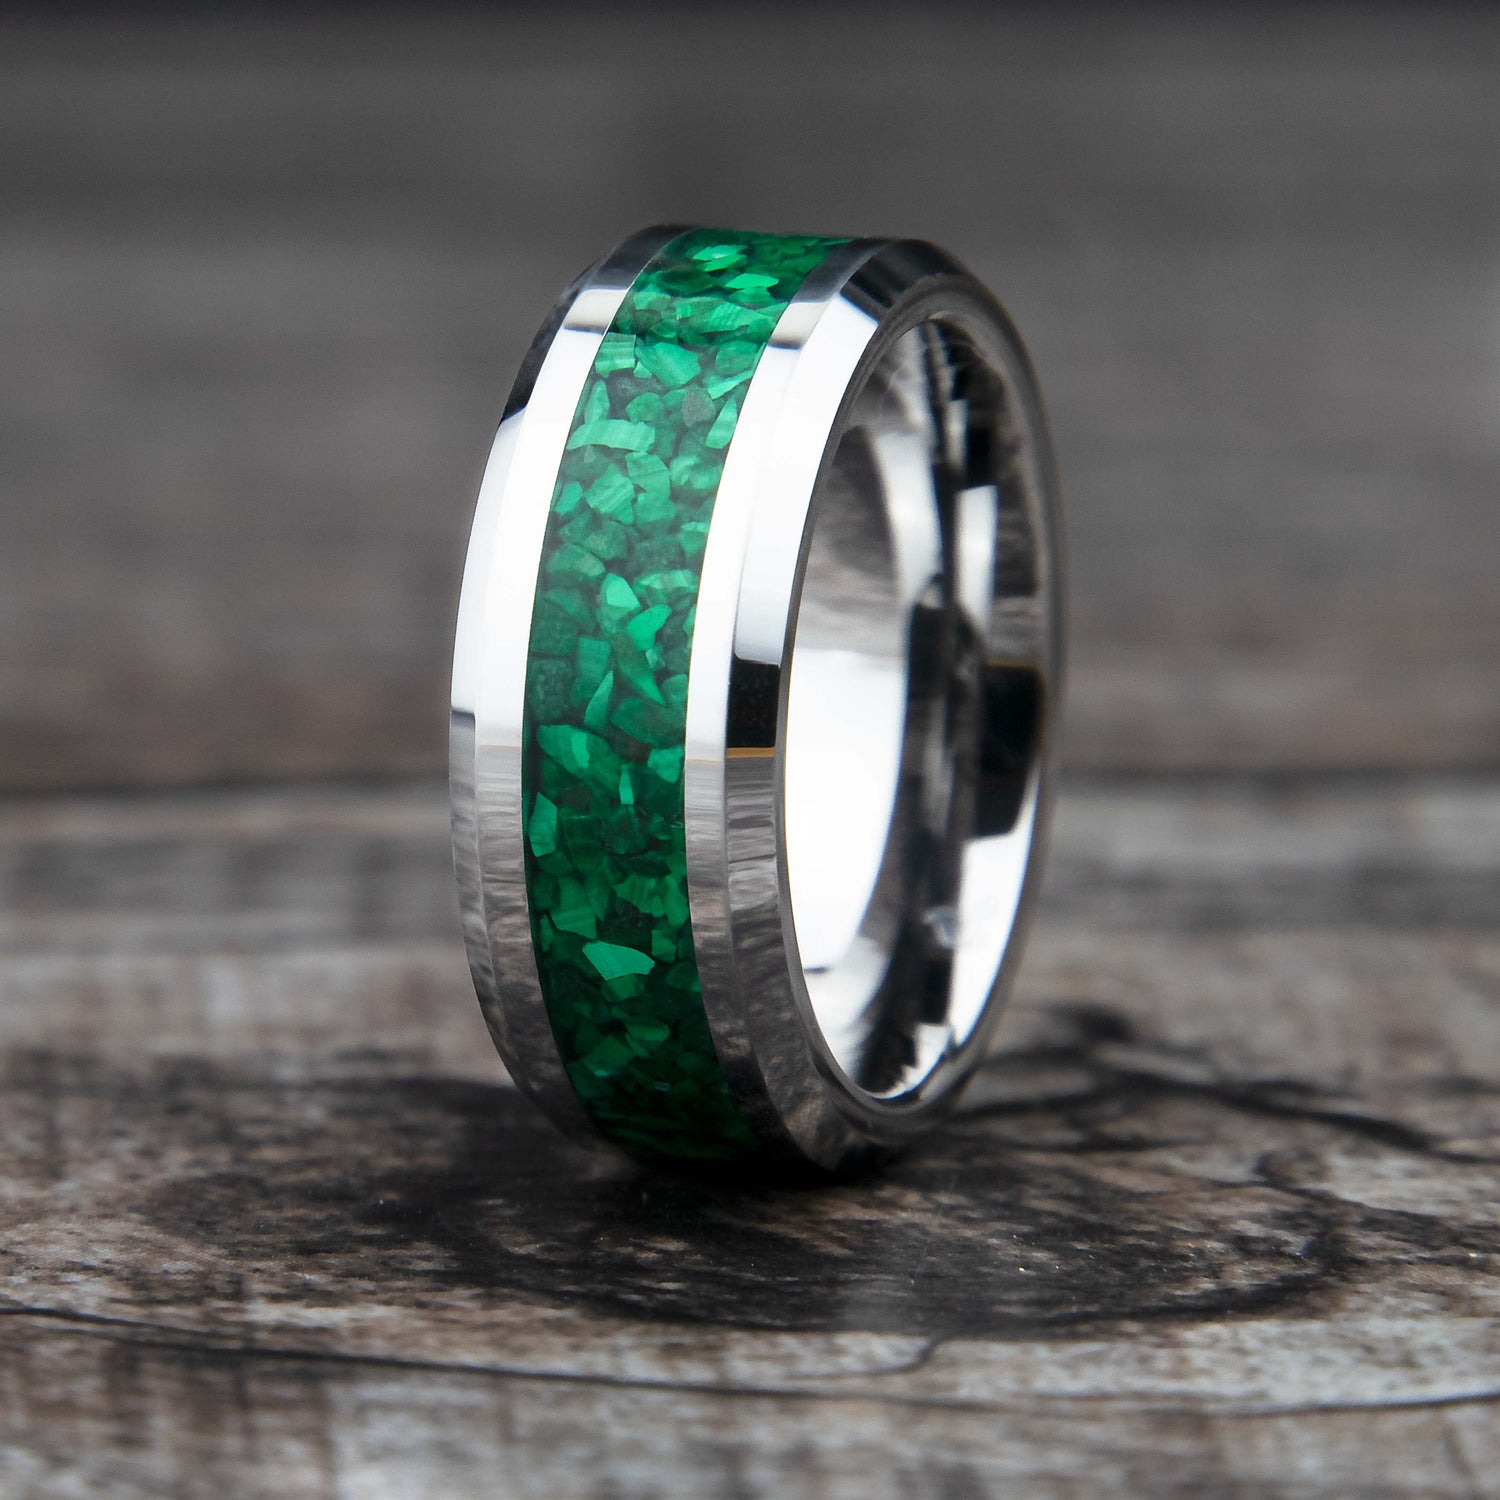 Unique Rings And Wedding Bands | Copperbeard Jewelry